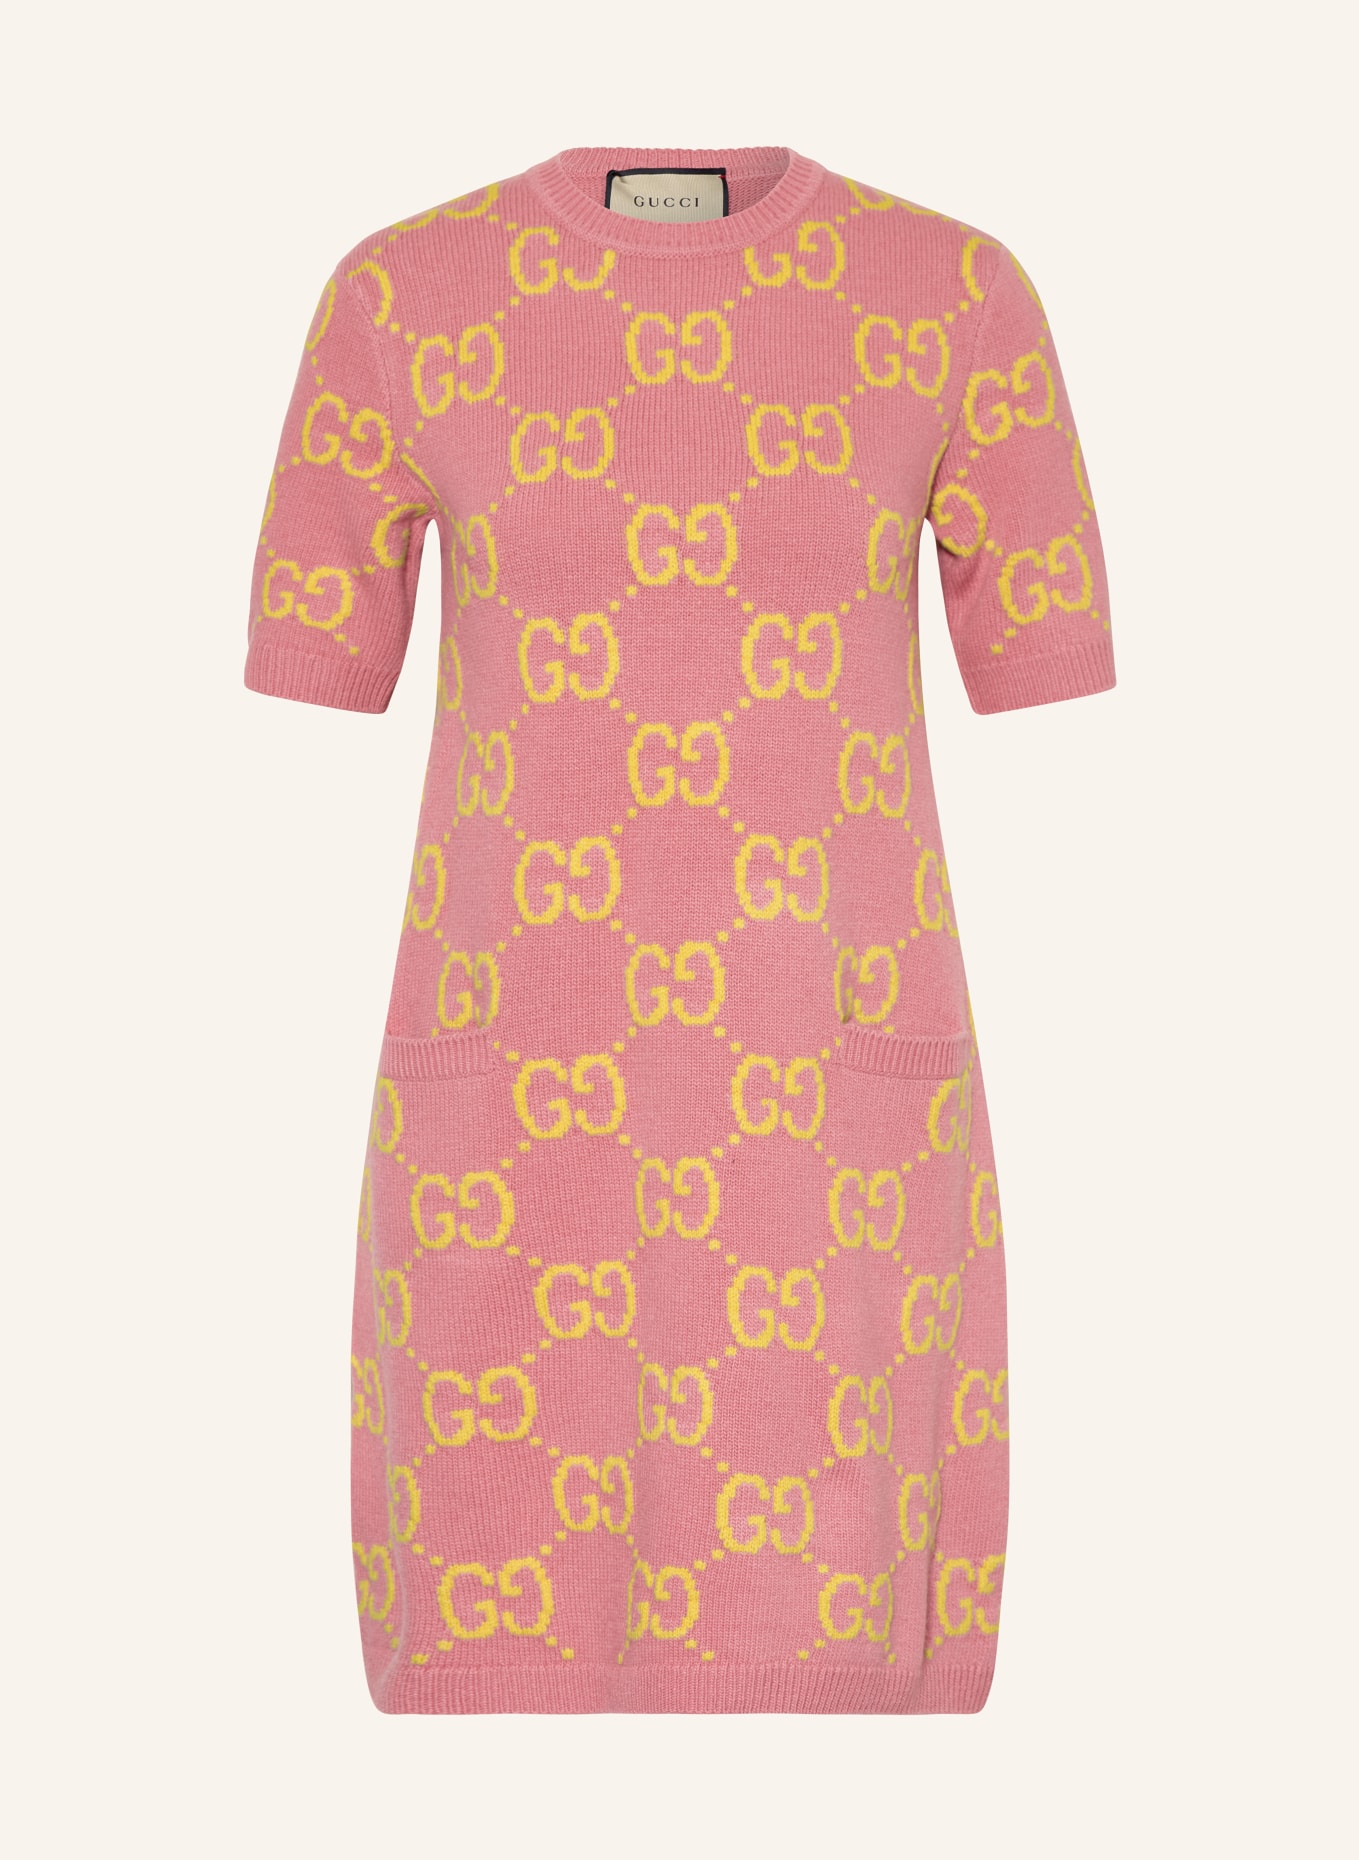 GUCCI Knit dress, Color: PINK/ DARK YELLOW (Image 1)